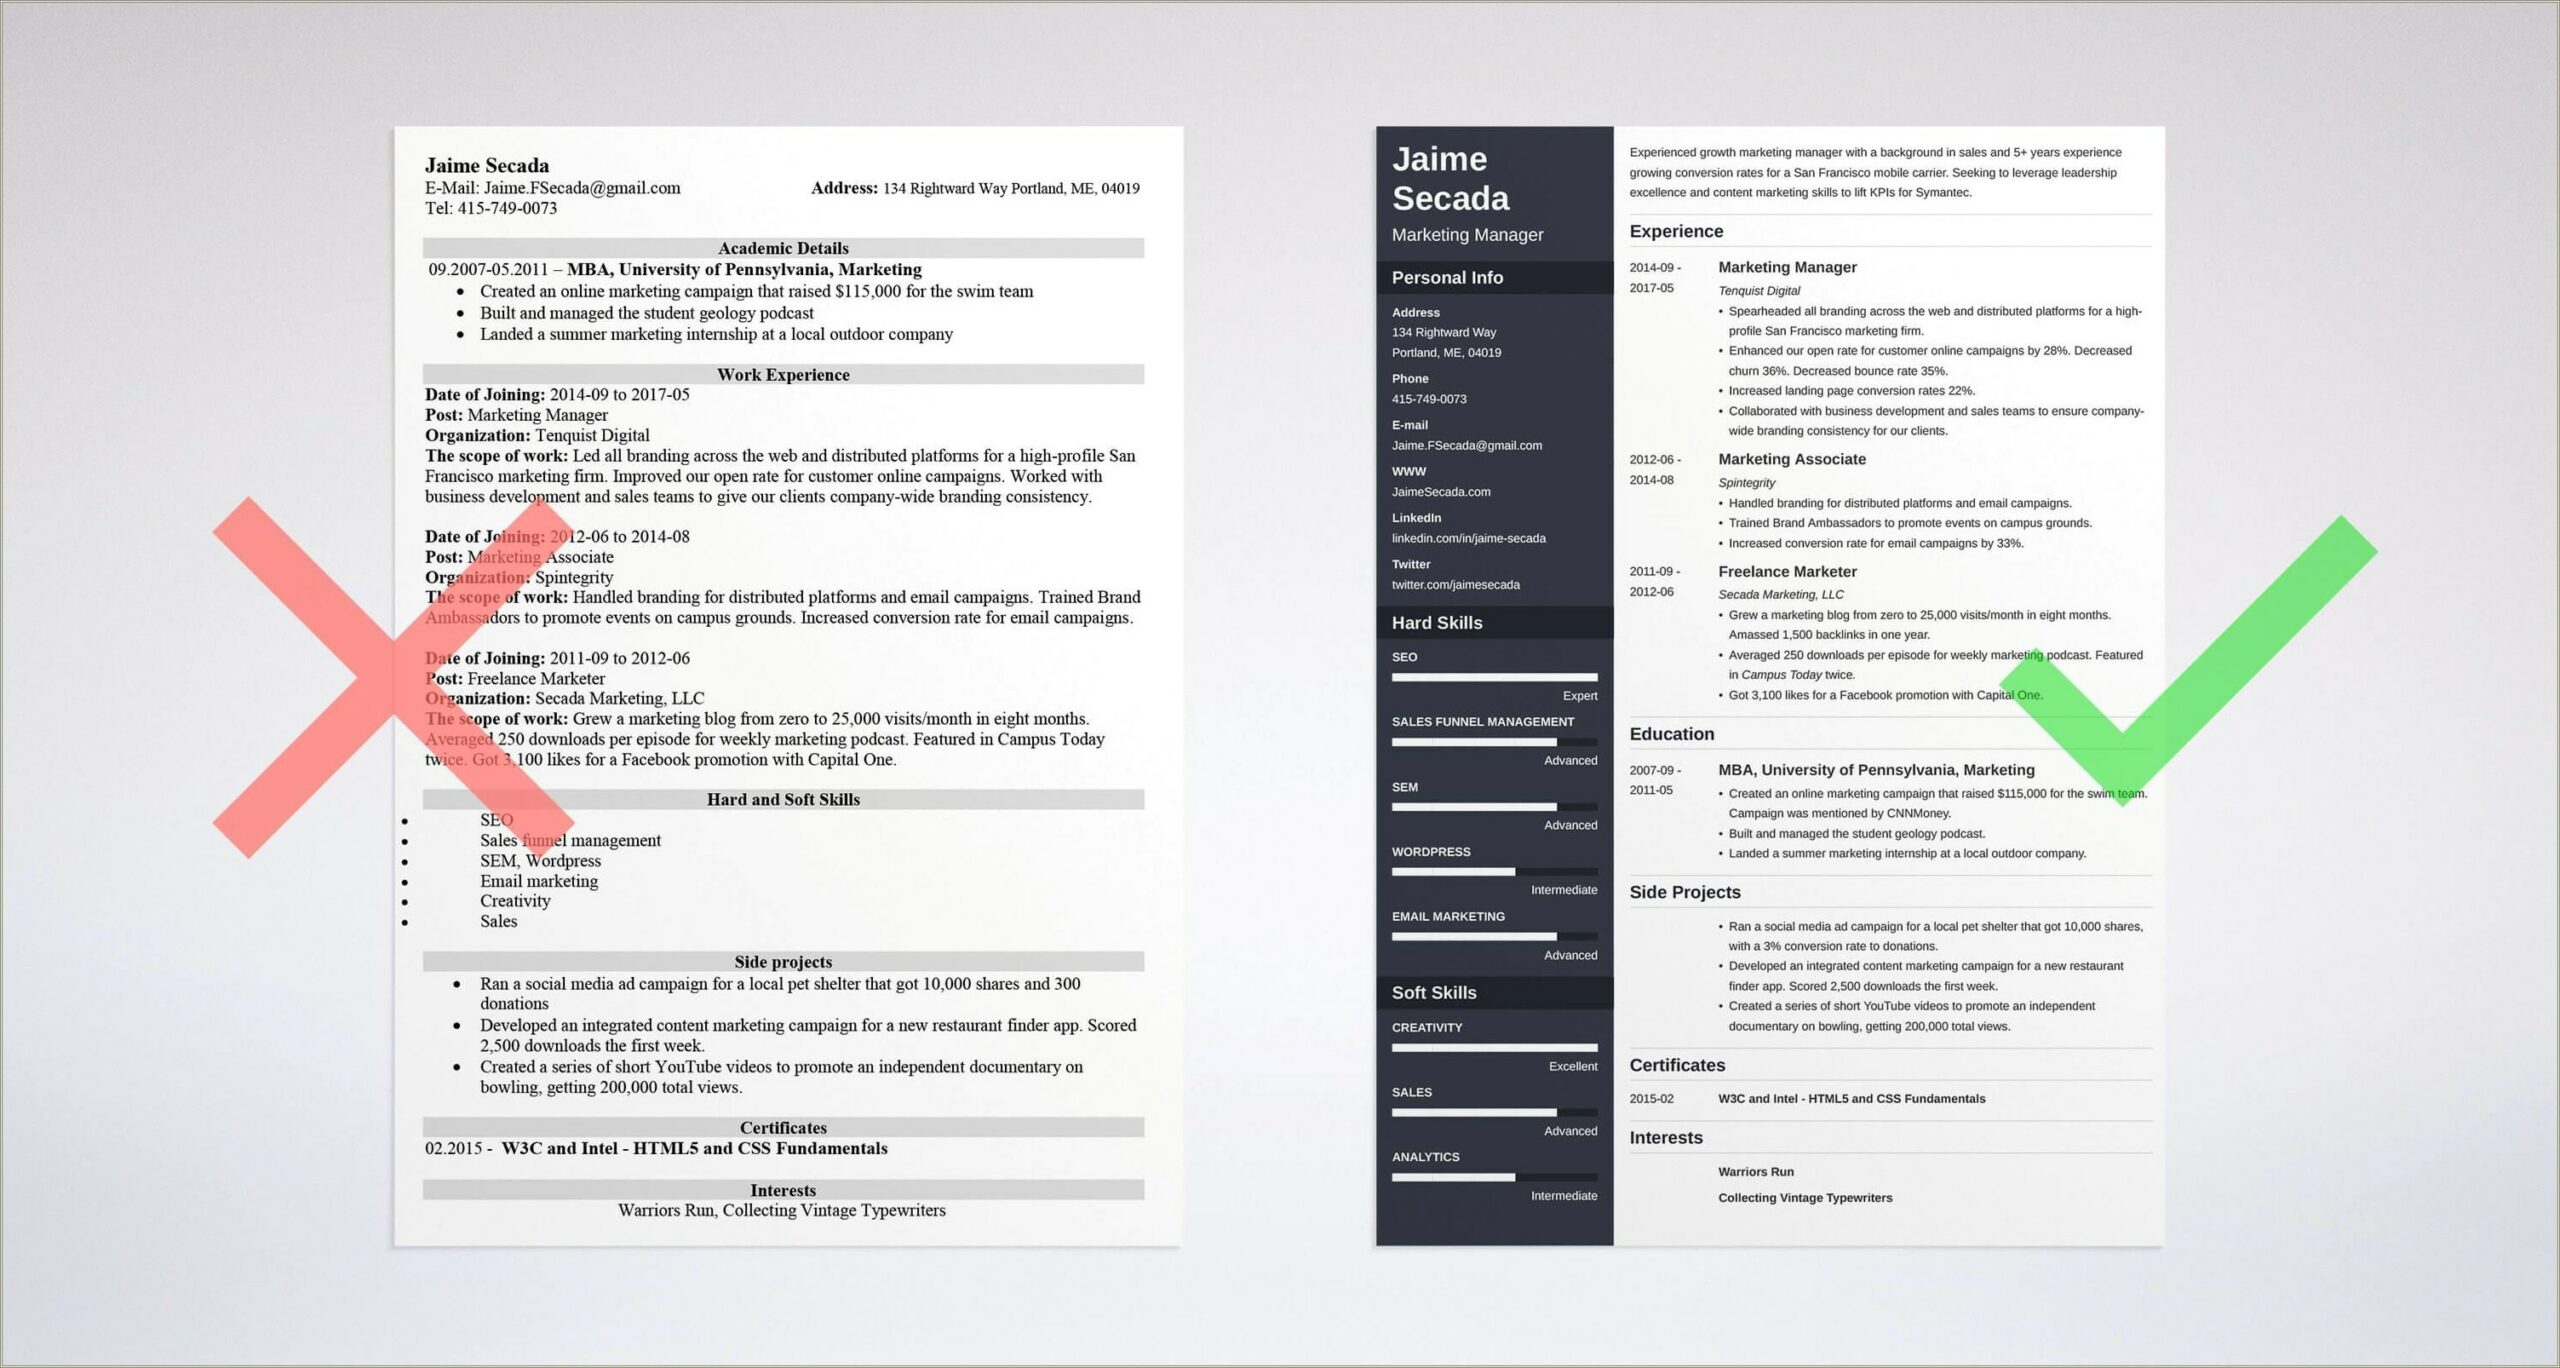 Best Way To Show Skills On Resume